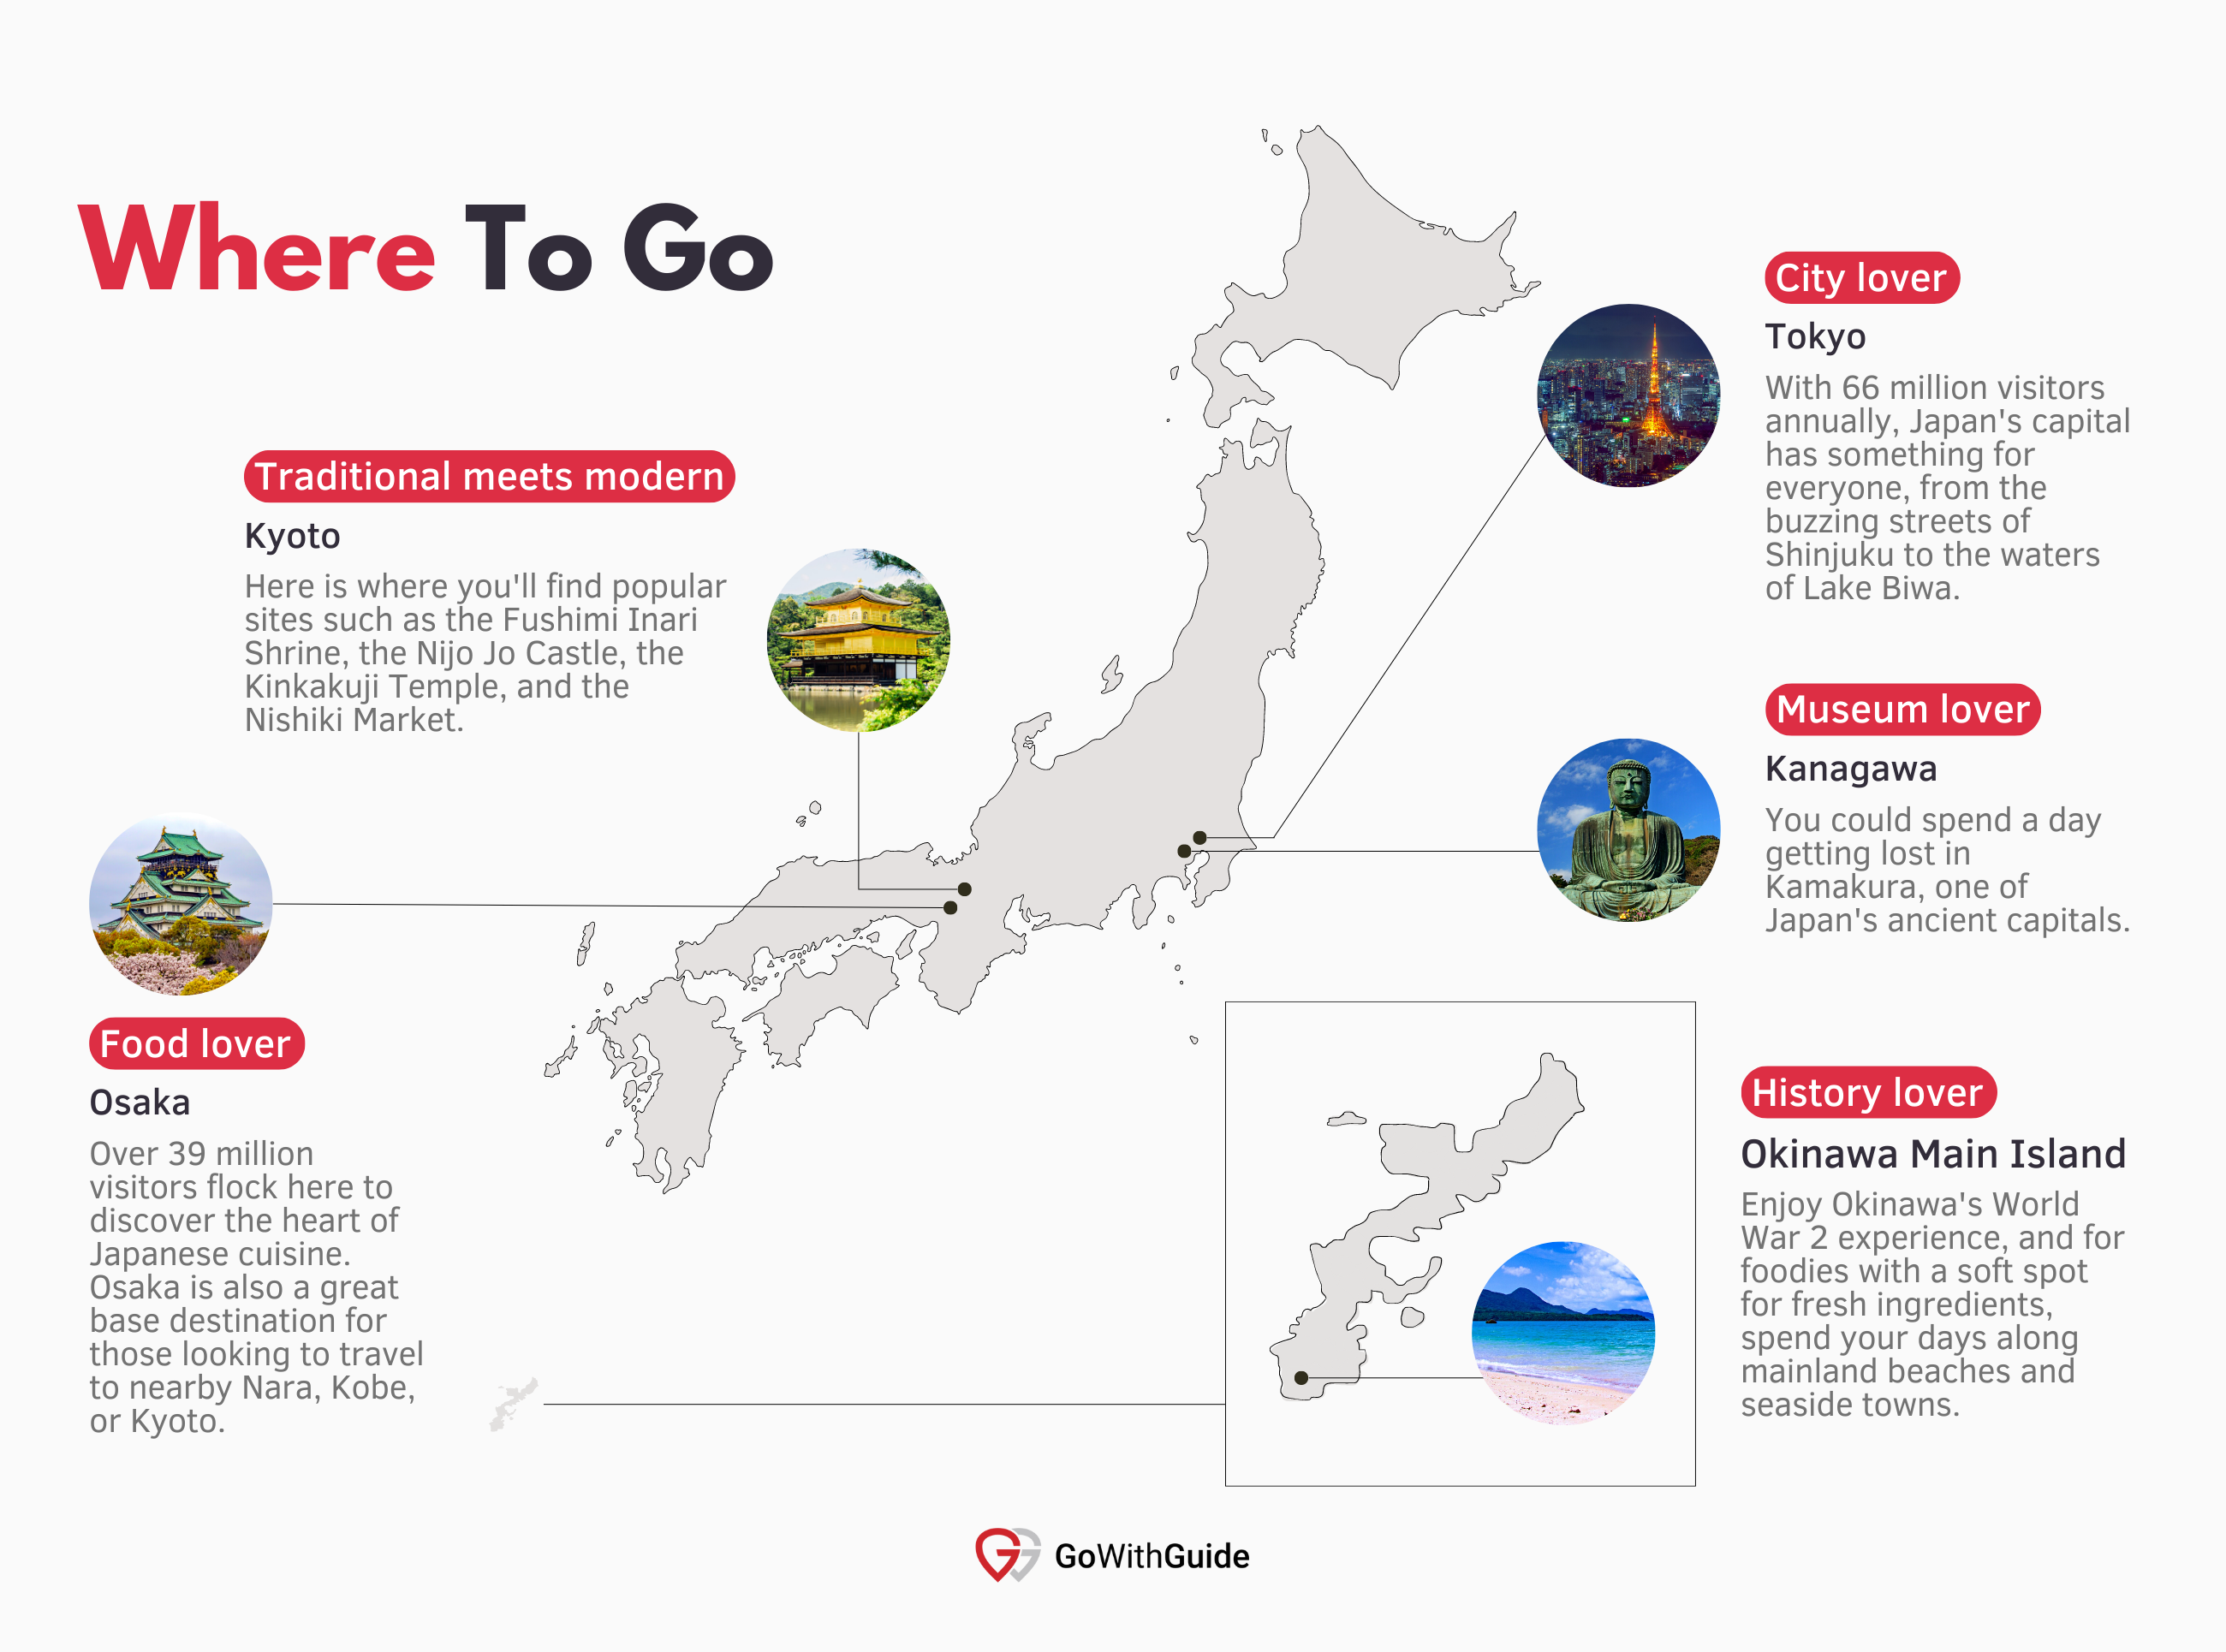 37 million and counting: Tokyo infographic ‹ GO Blog